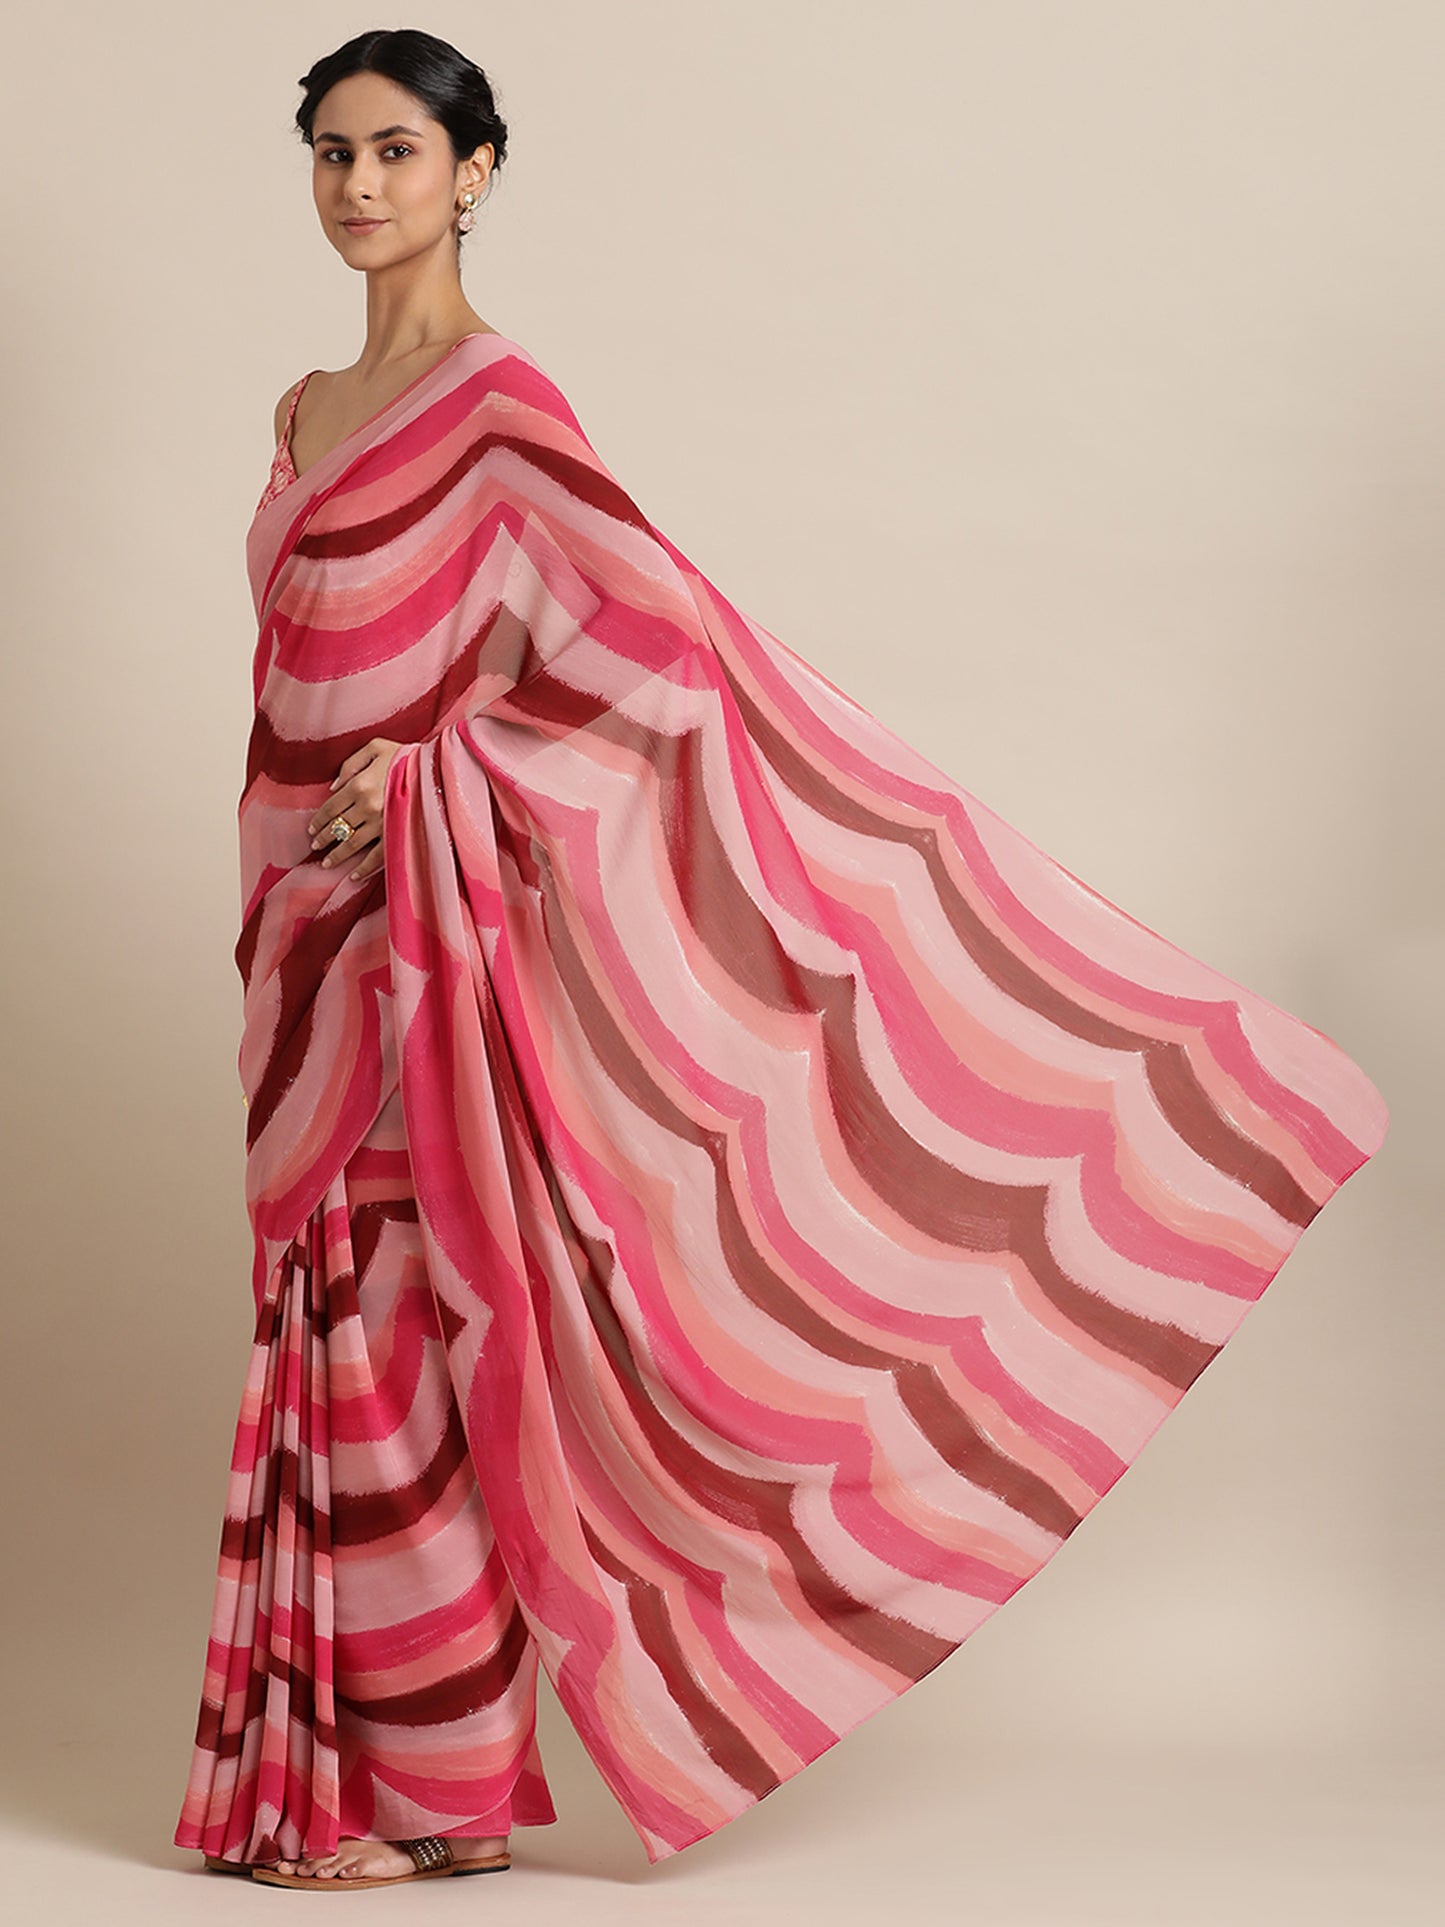 Symphony of Scallops in Viscose Georgette Pink Saree